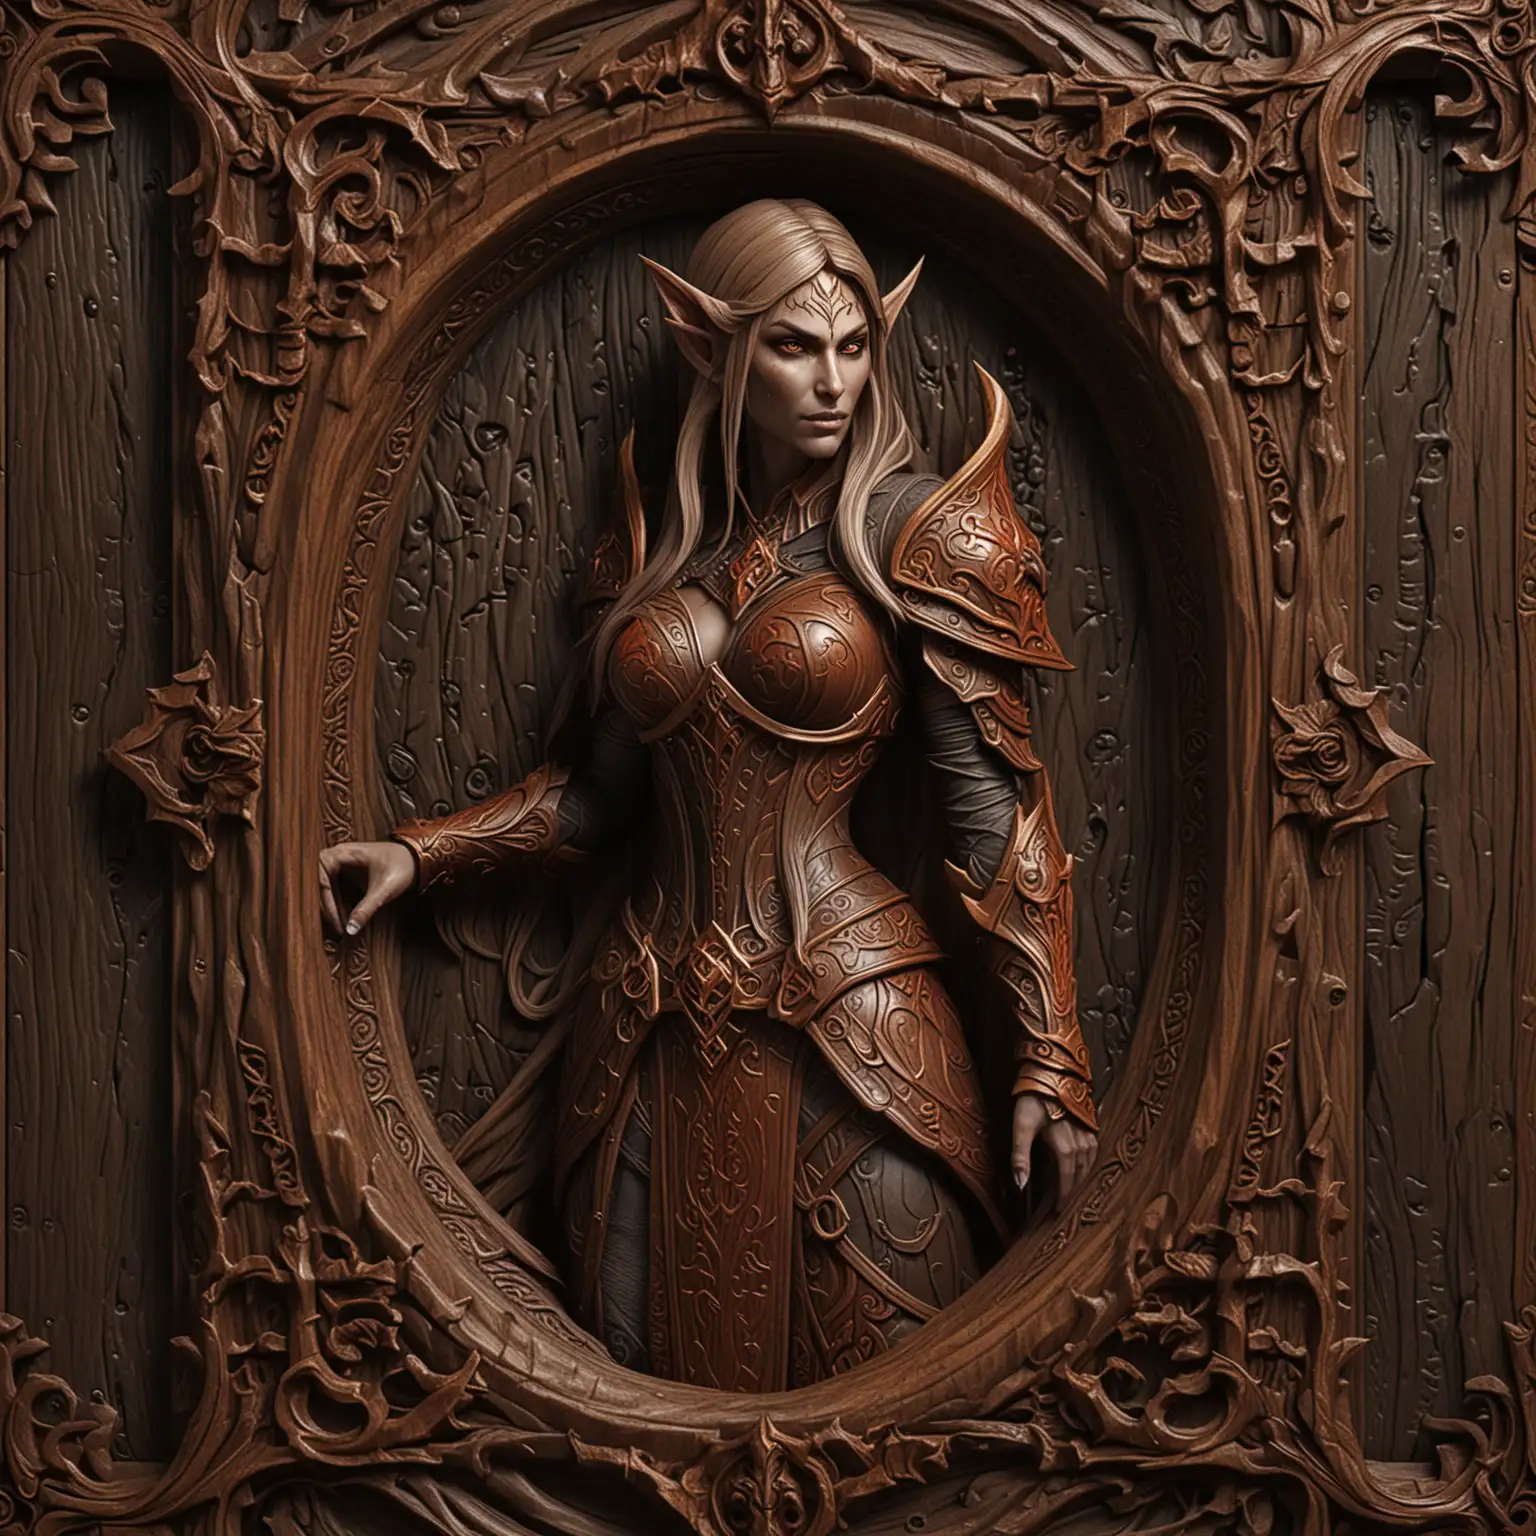 3D SEAMLESS TEXTURE, DARK CARVED WOOD WITH AN INTRICATE CARVED WOOD FRAME, FEATURING THE BLOOD ELF SYLVANAS WINDRUNNER FULL BODY OF WORLD OF WARCRAFT